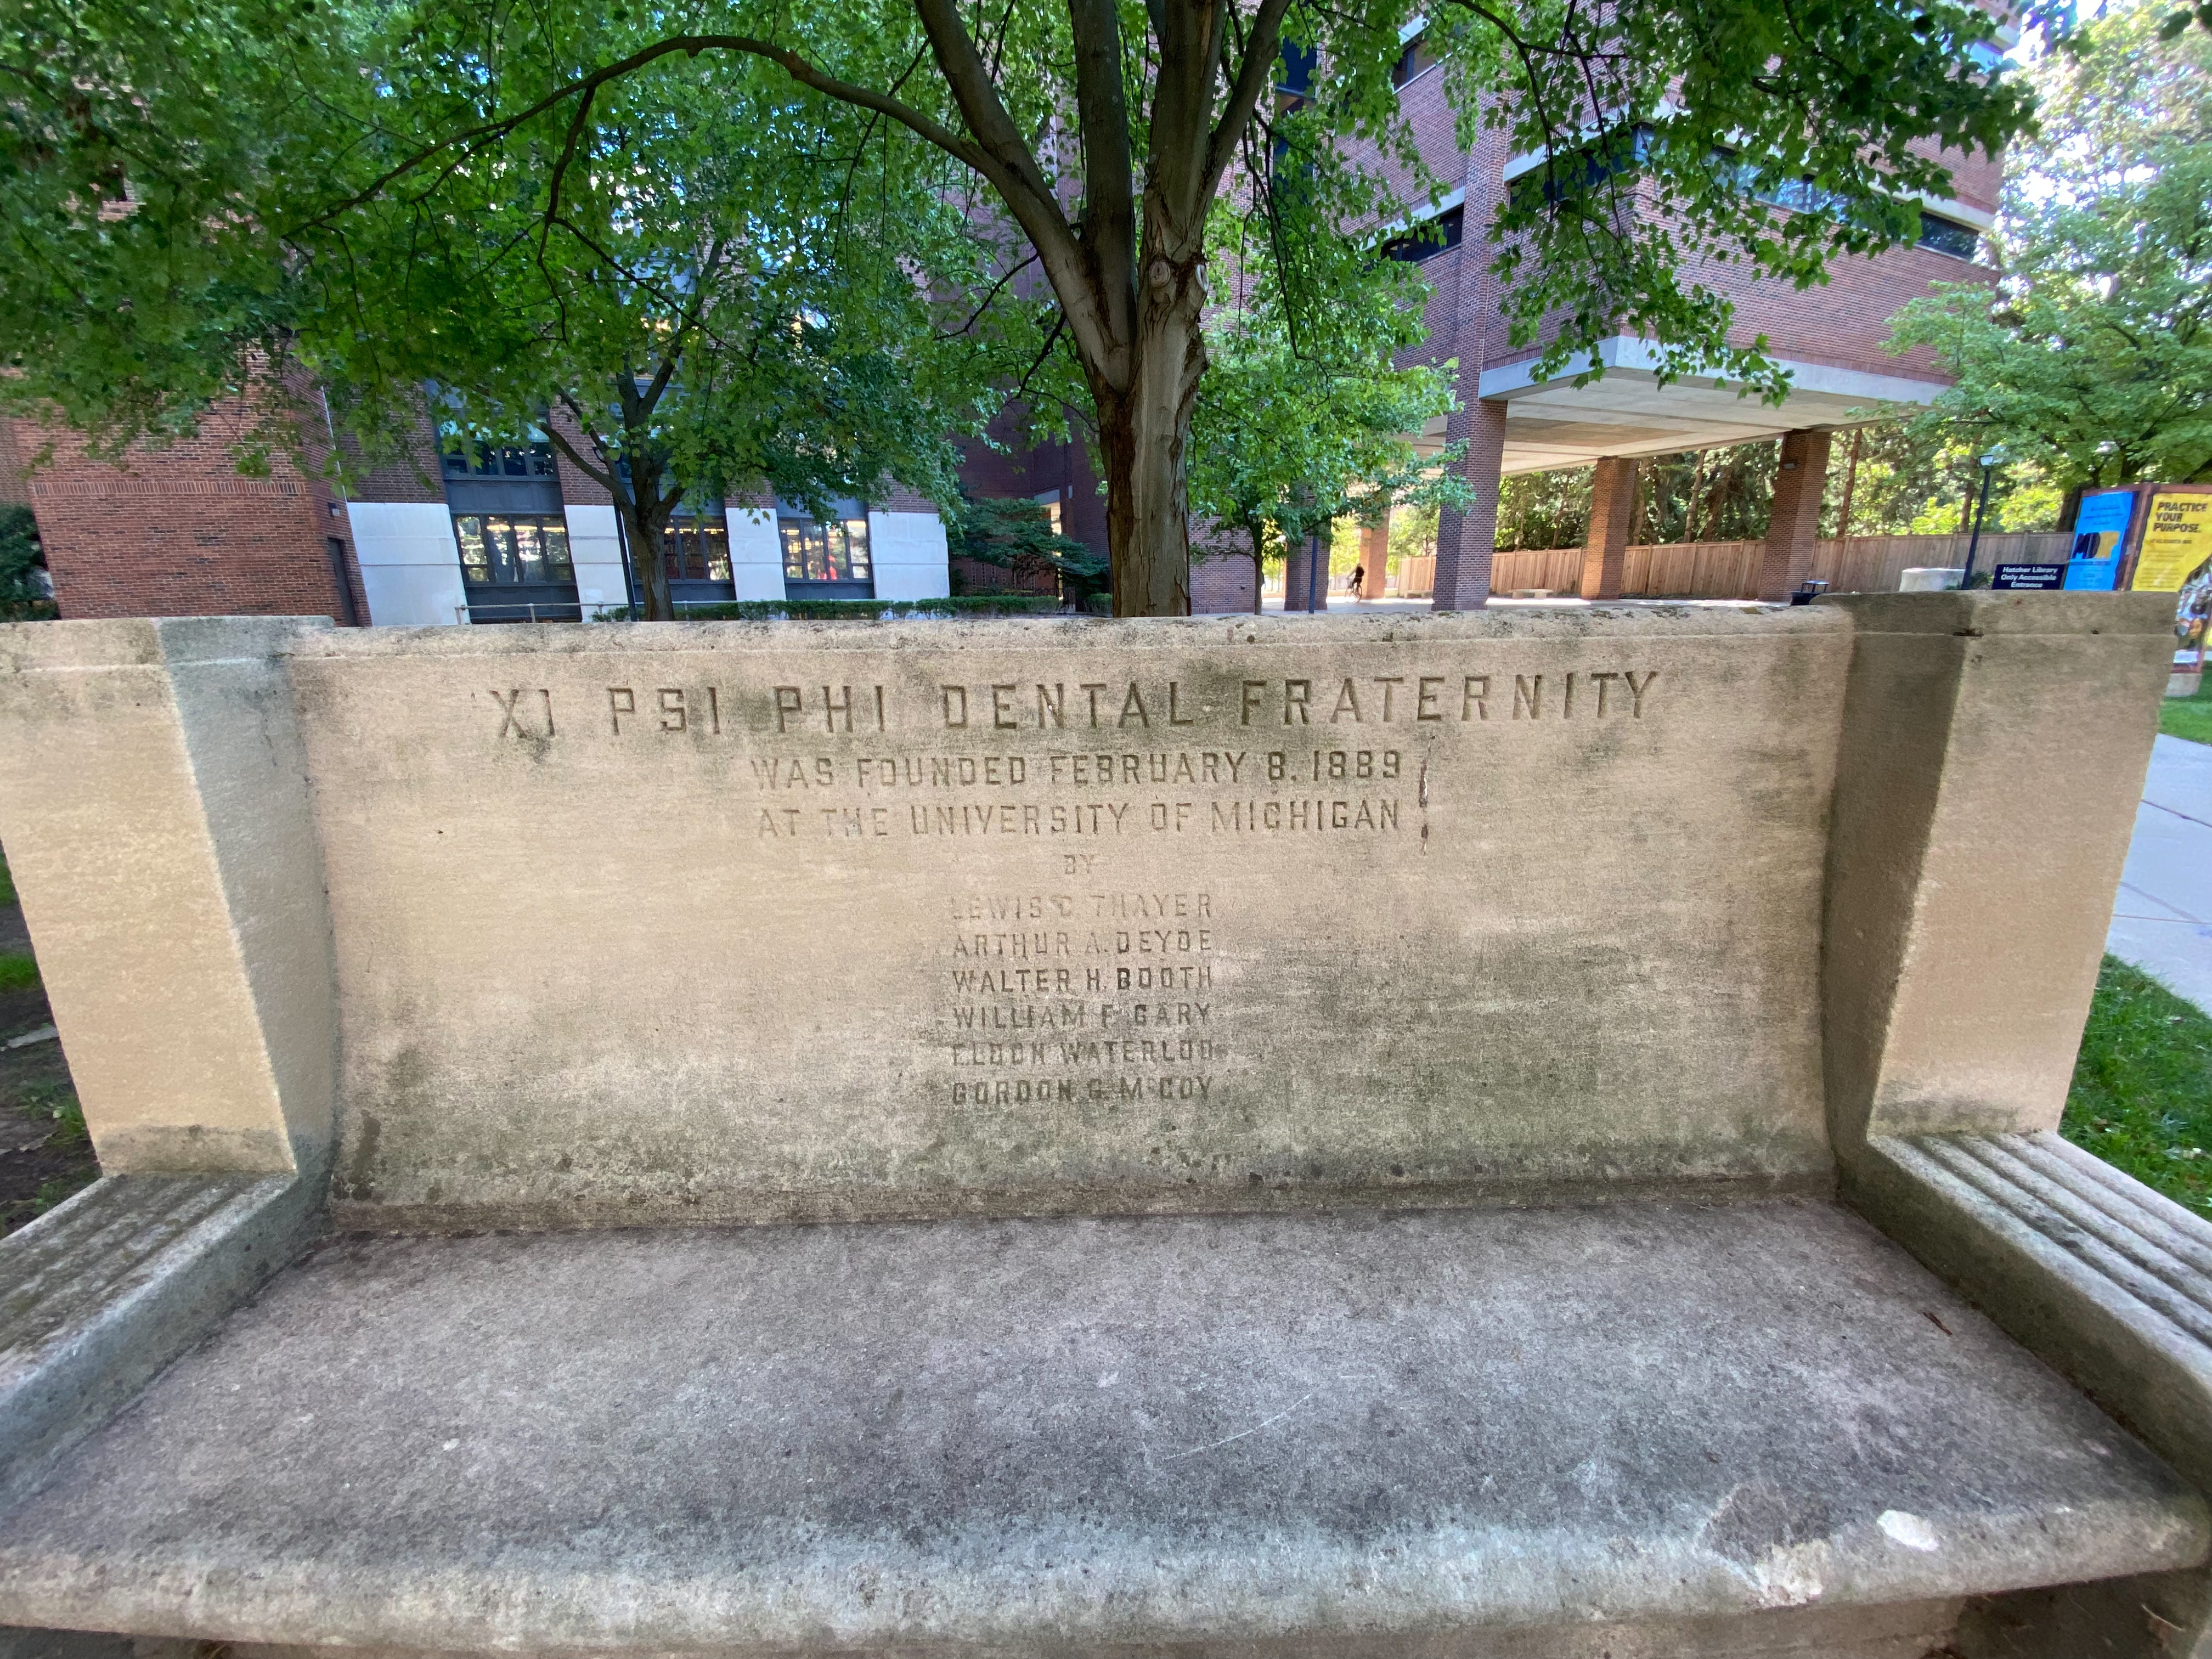 Xi Psi Phi Fraternity Bench Marker